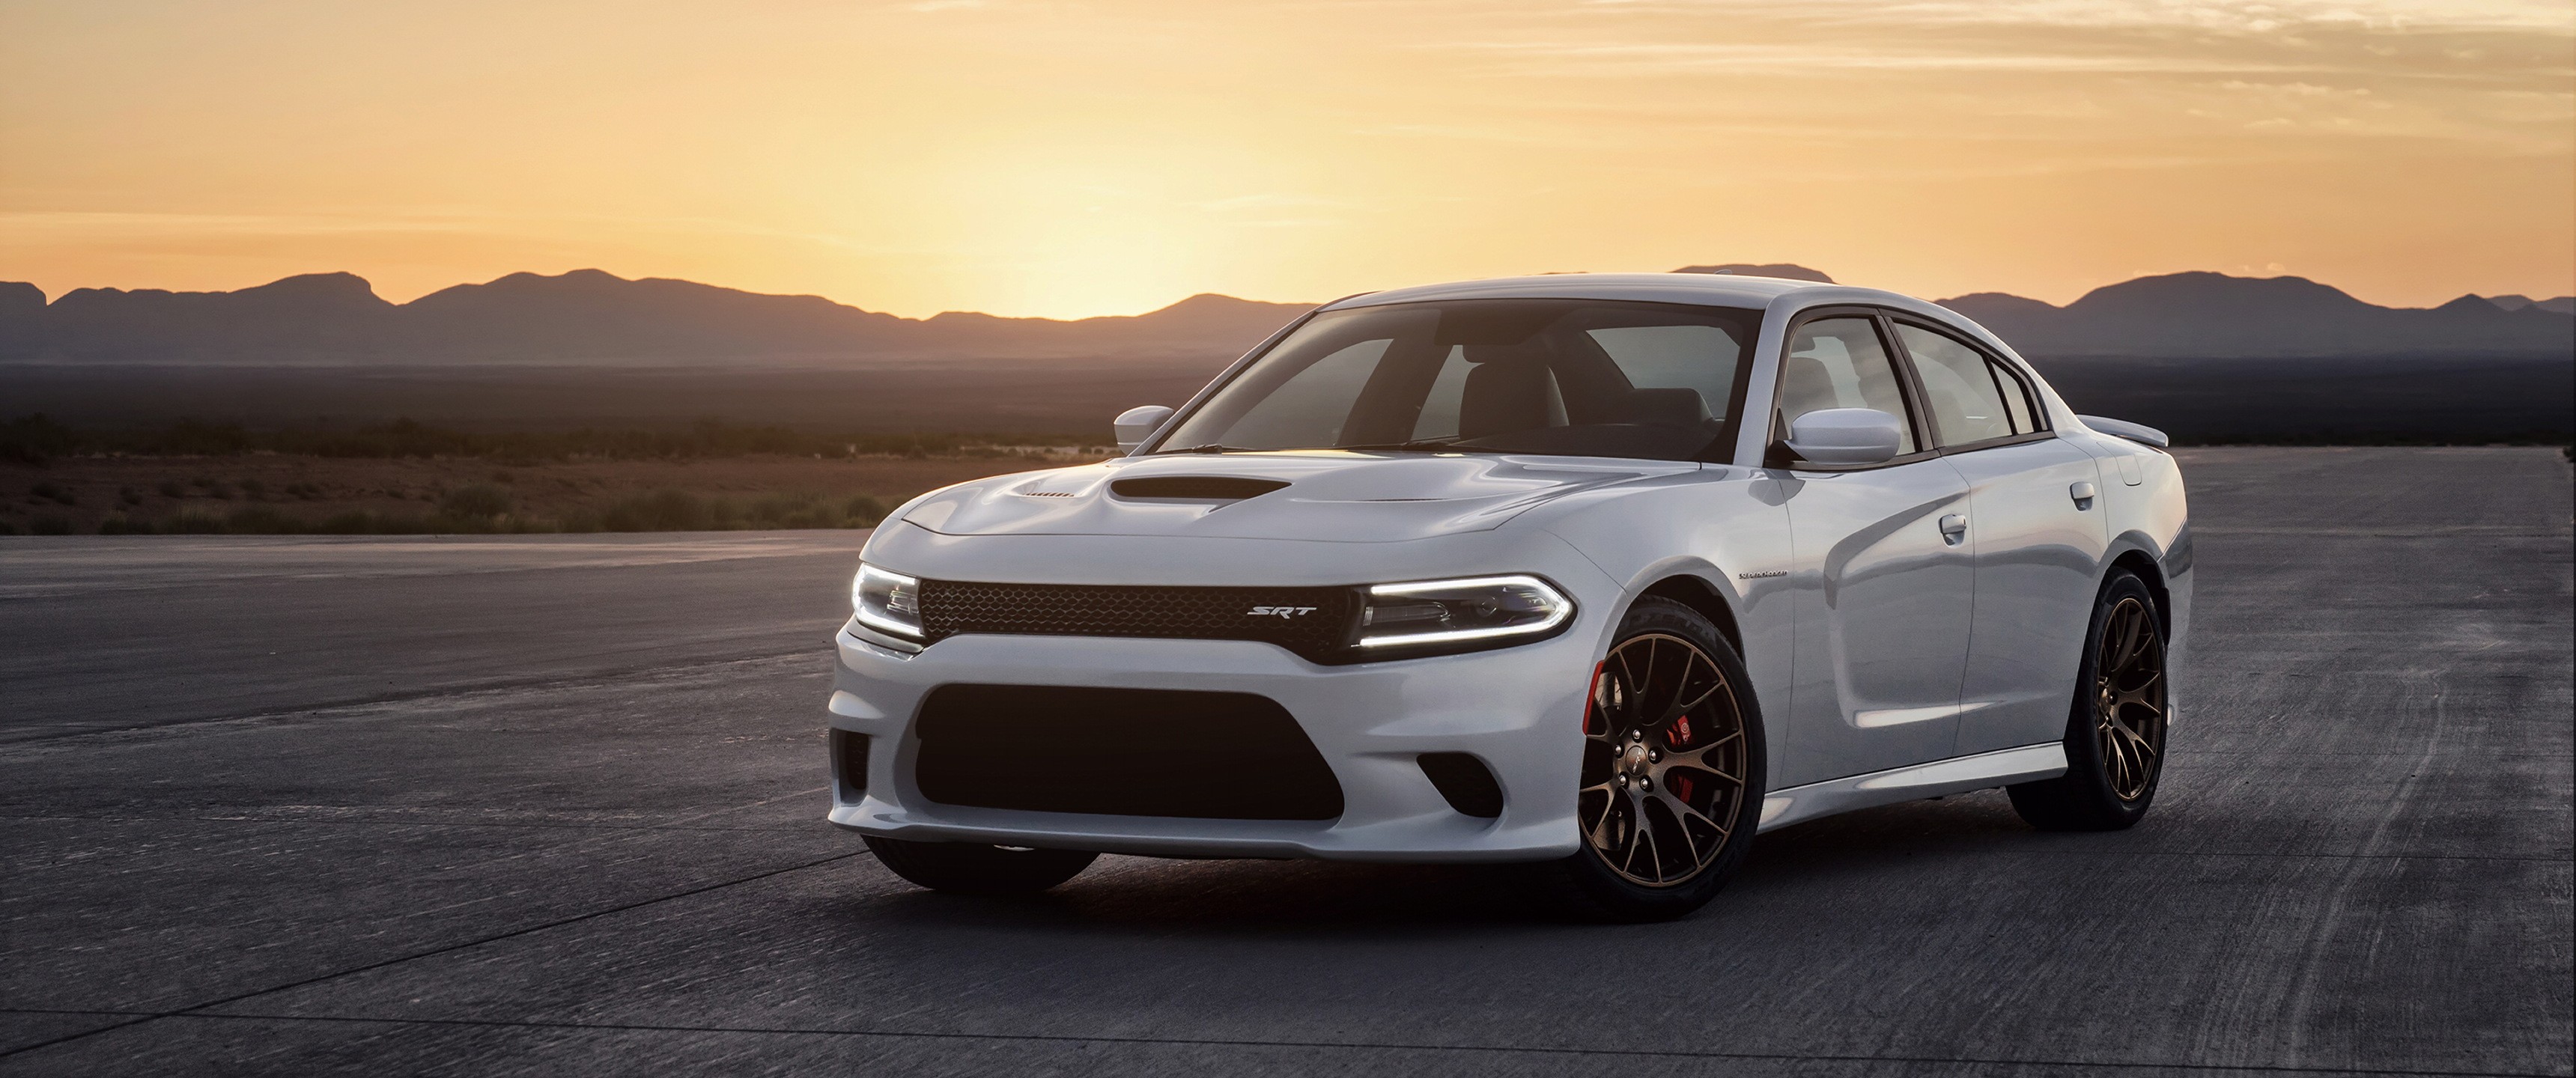 2048x1152 Dodge Charger Hellcat 2048x1152 Resolution HD 4k Wallpapers